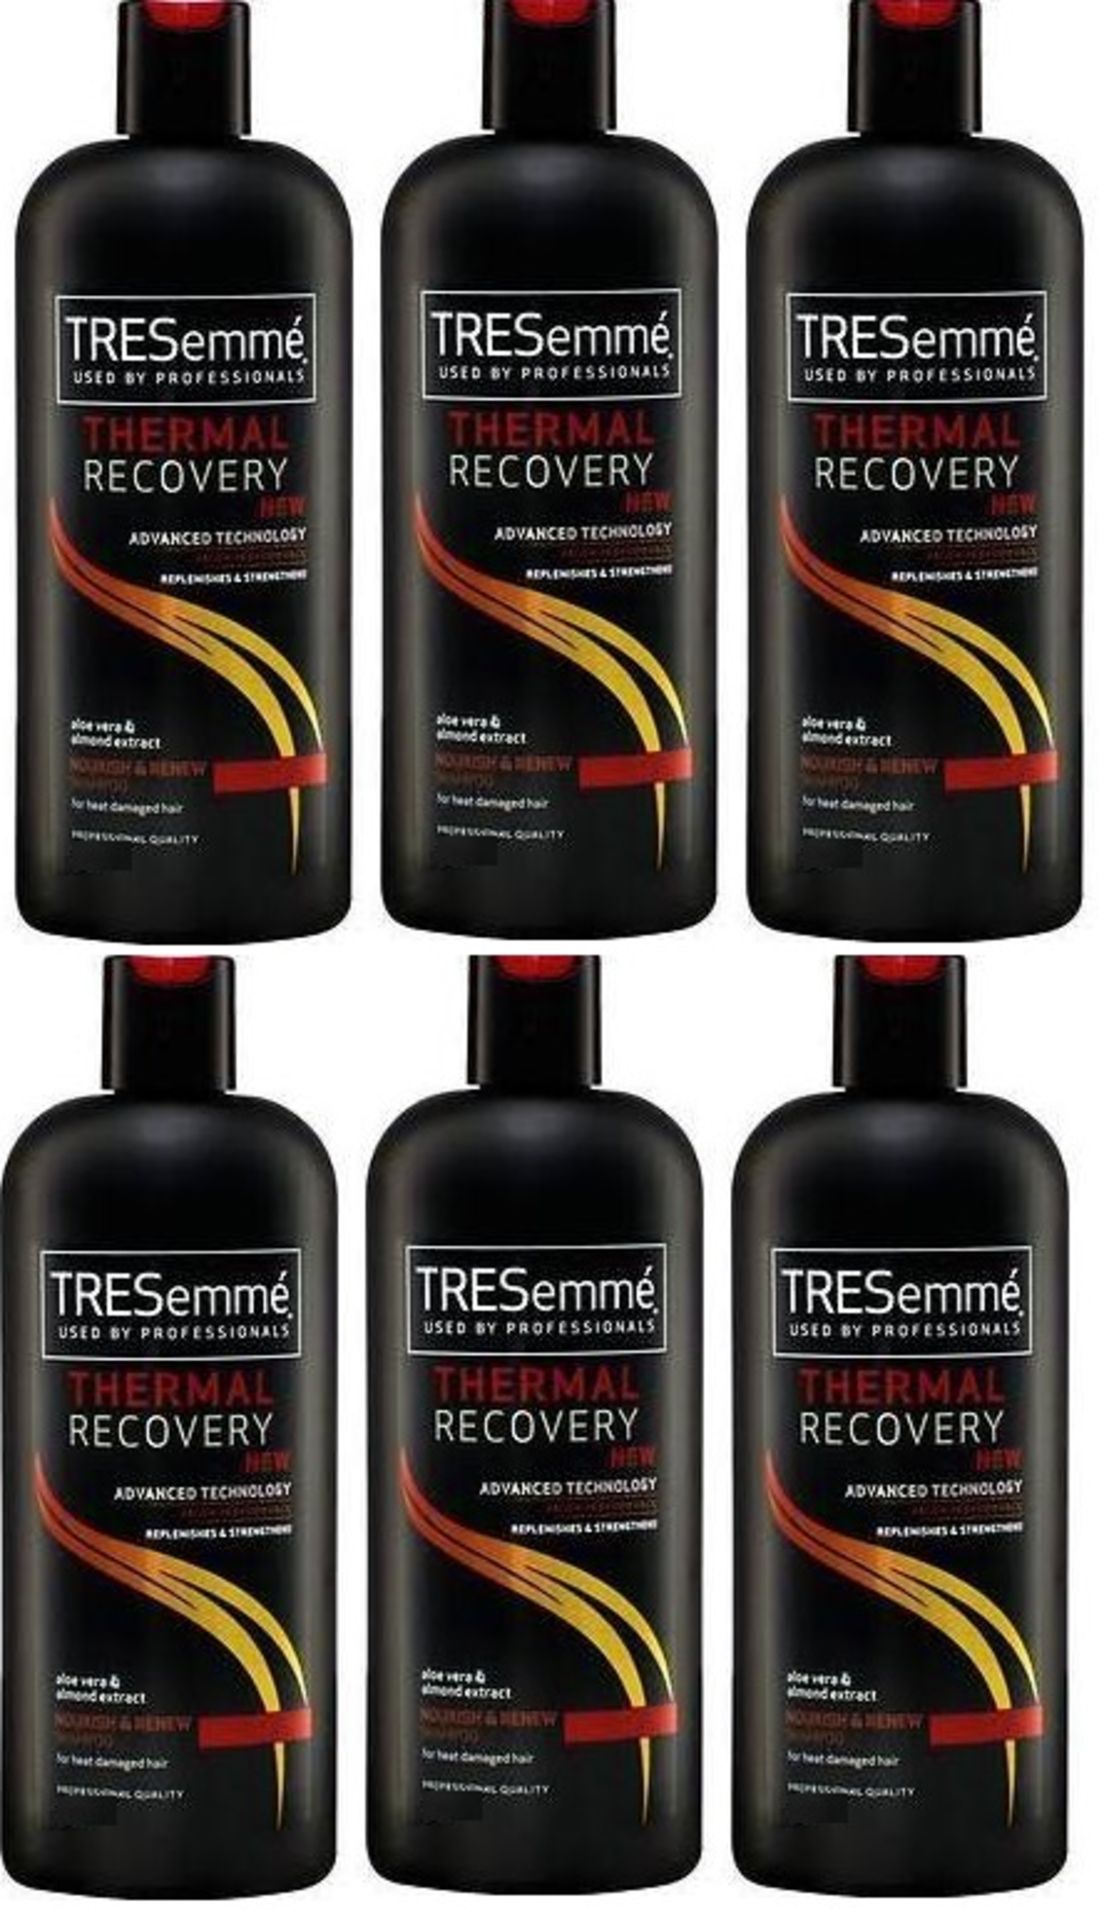 V Brand New Lot of 6 TRESemme Professional 500ml Thermal Recovery Shampoo With Aloe Vera &Almond